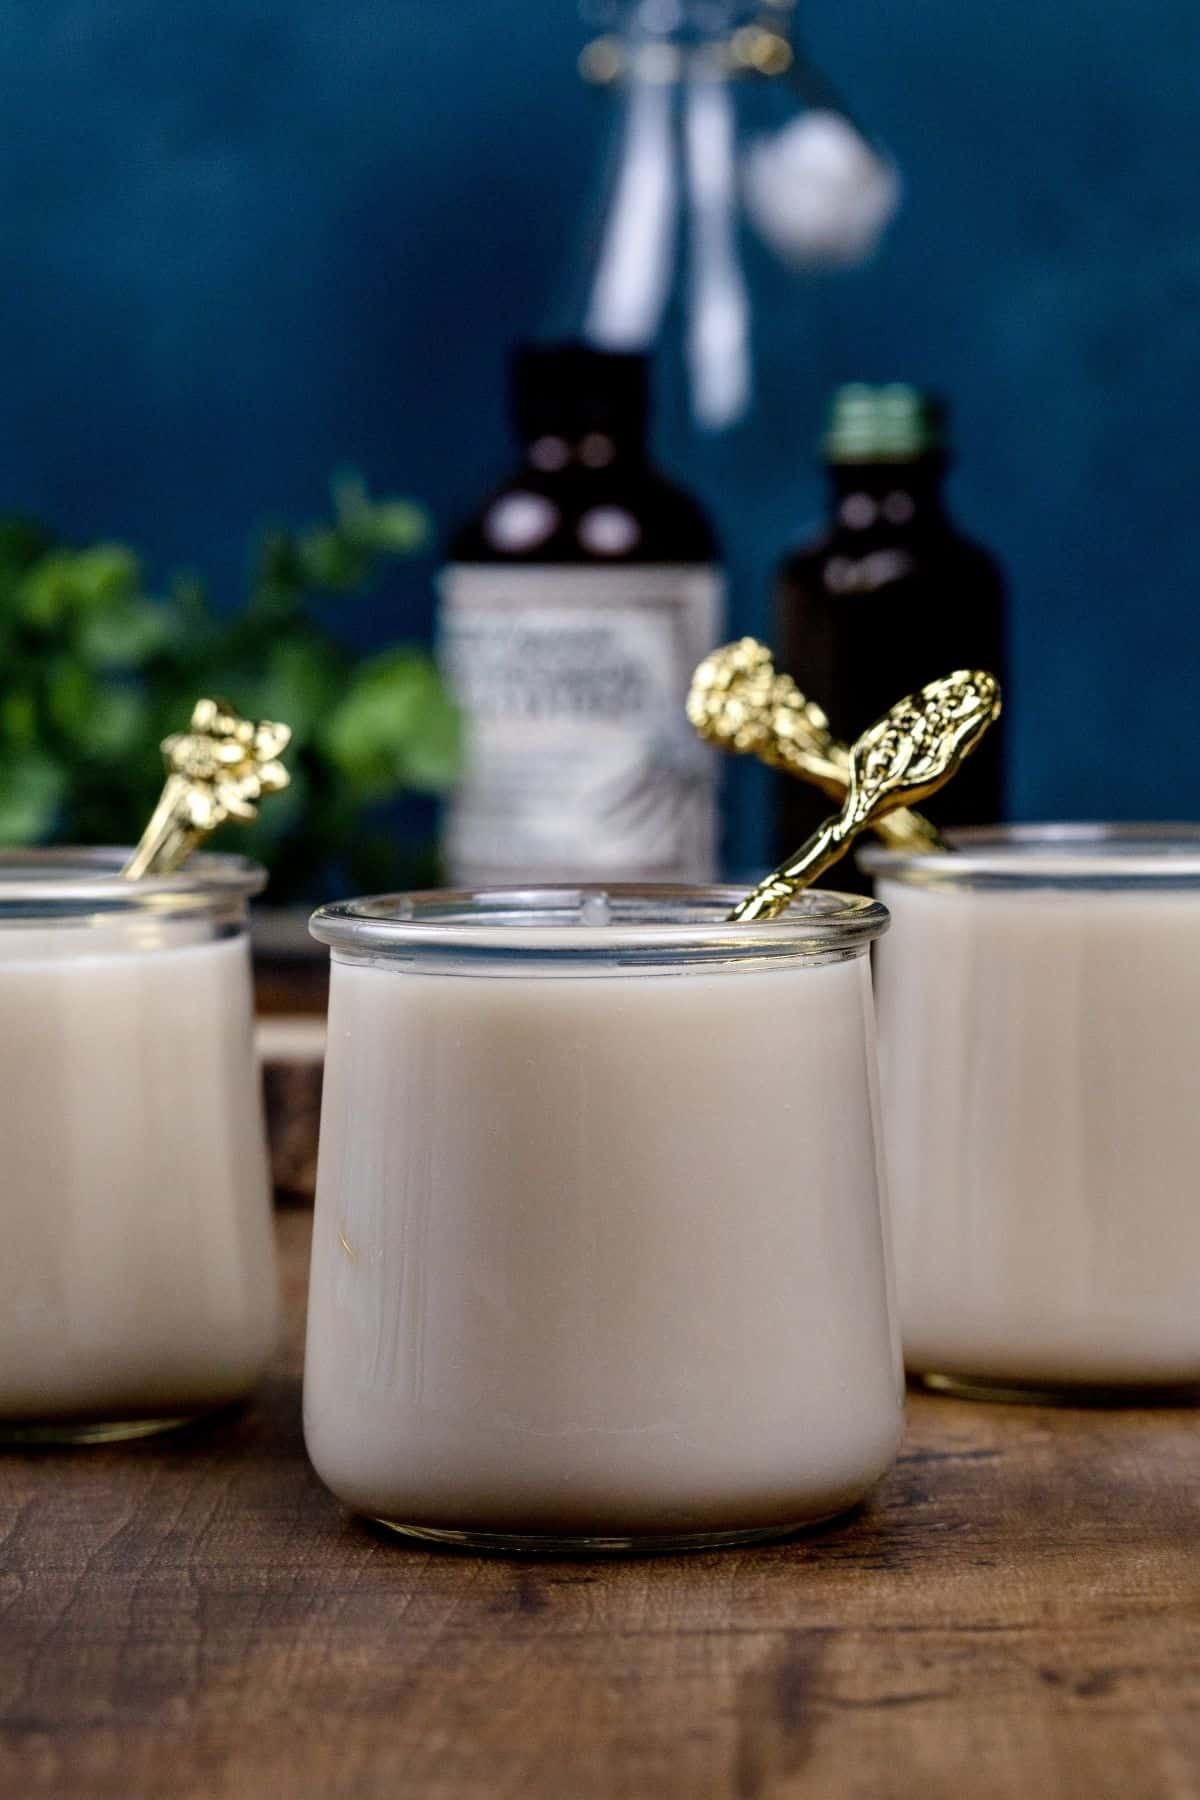 3 glass cups filled with vegan vanilla pudding. Each has a tiny gold spoon in the cup. Bottles of vanilla are blurred in the background.